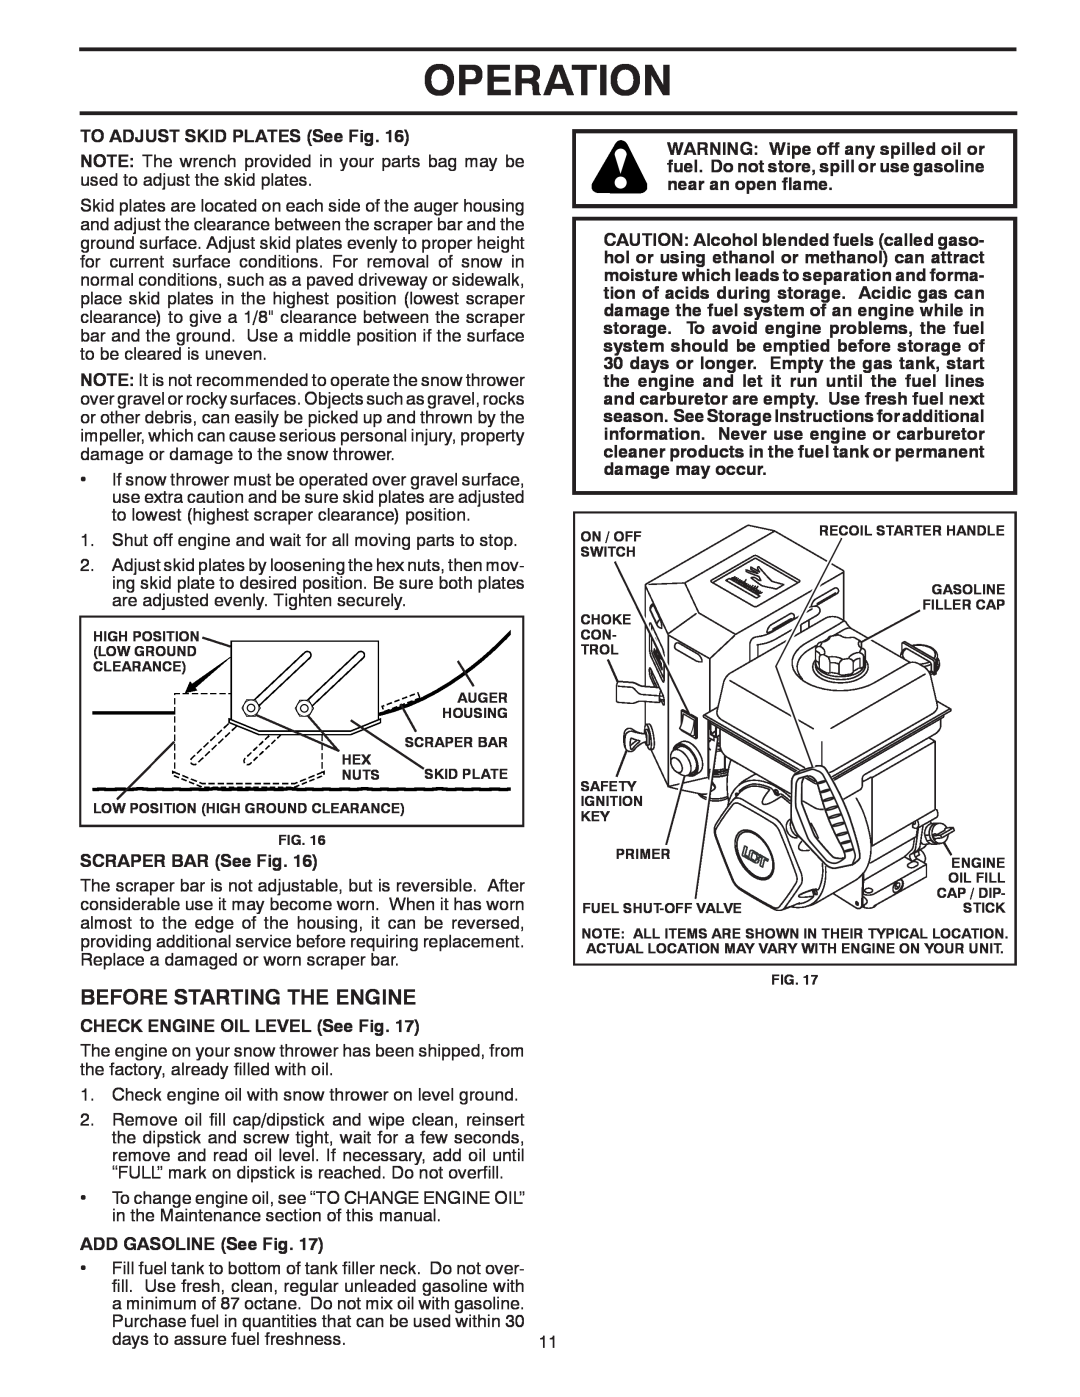 Poulan 96192002802 Before Starting The Engine, Operation, TO ADJUST SKID PLATES See Fig, used to adjust the skid plates 